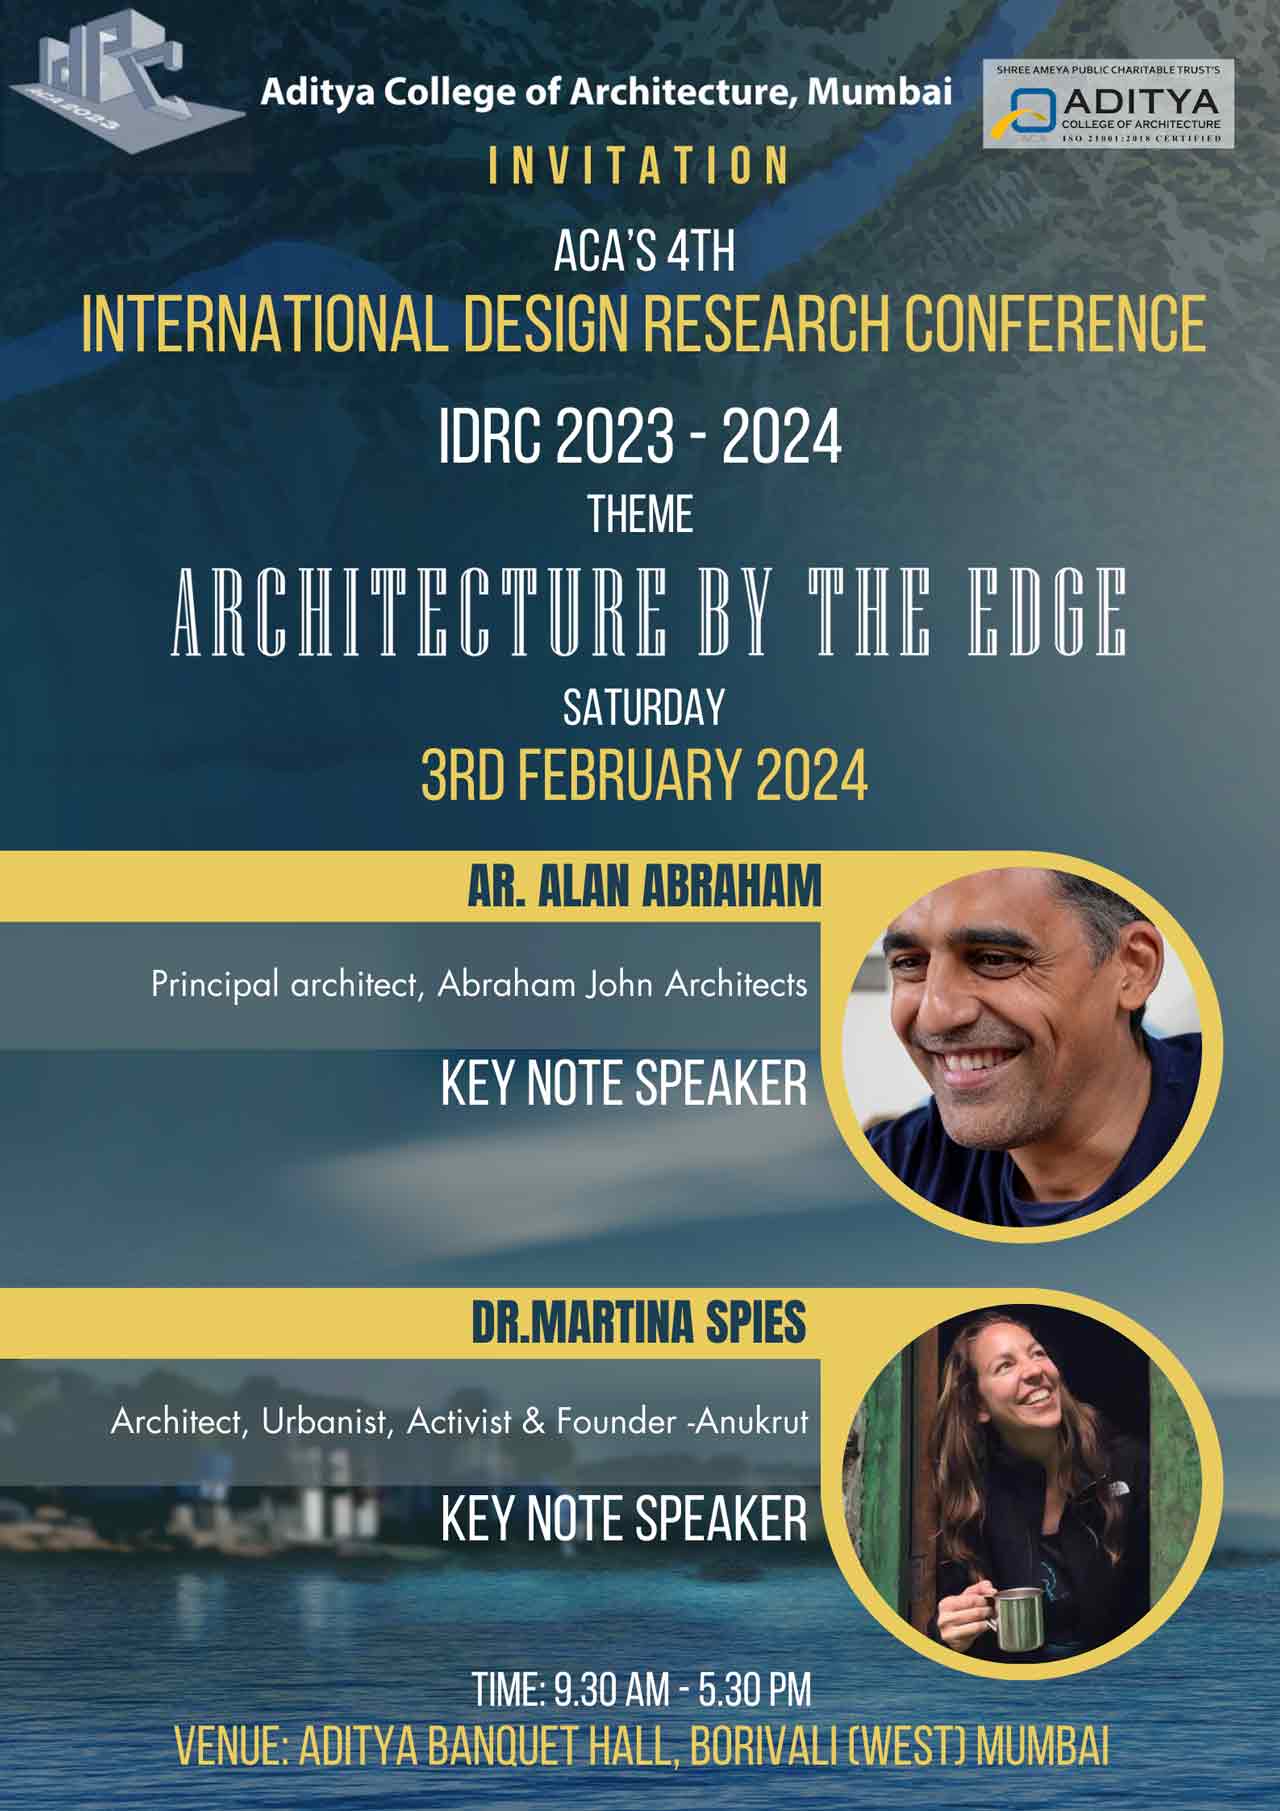 WELCOME TO ACA's 4th INTERNATIONAL DESIGN RESEARCH CONFERENCE